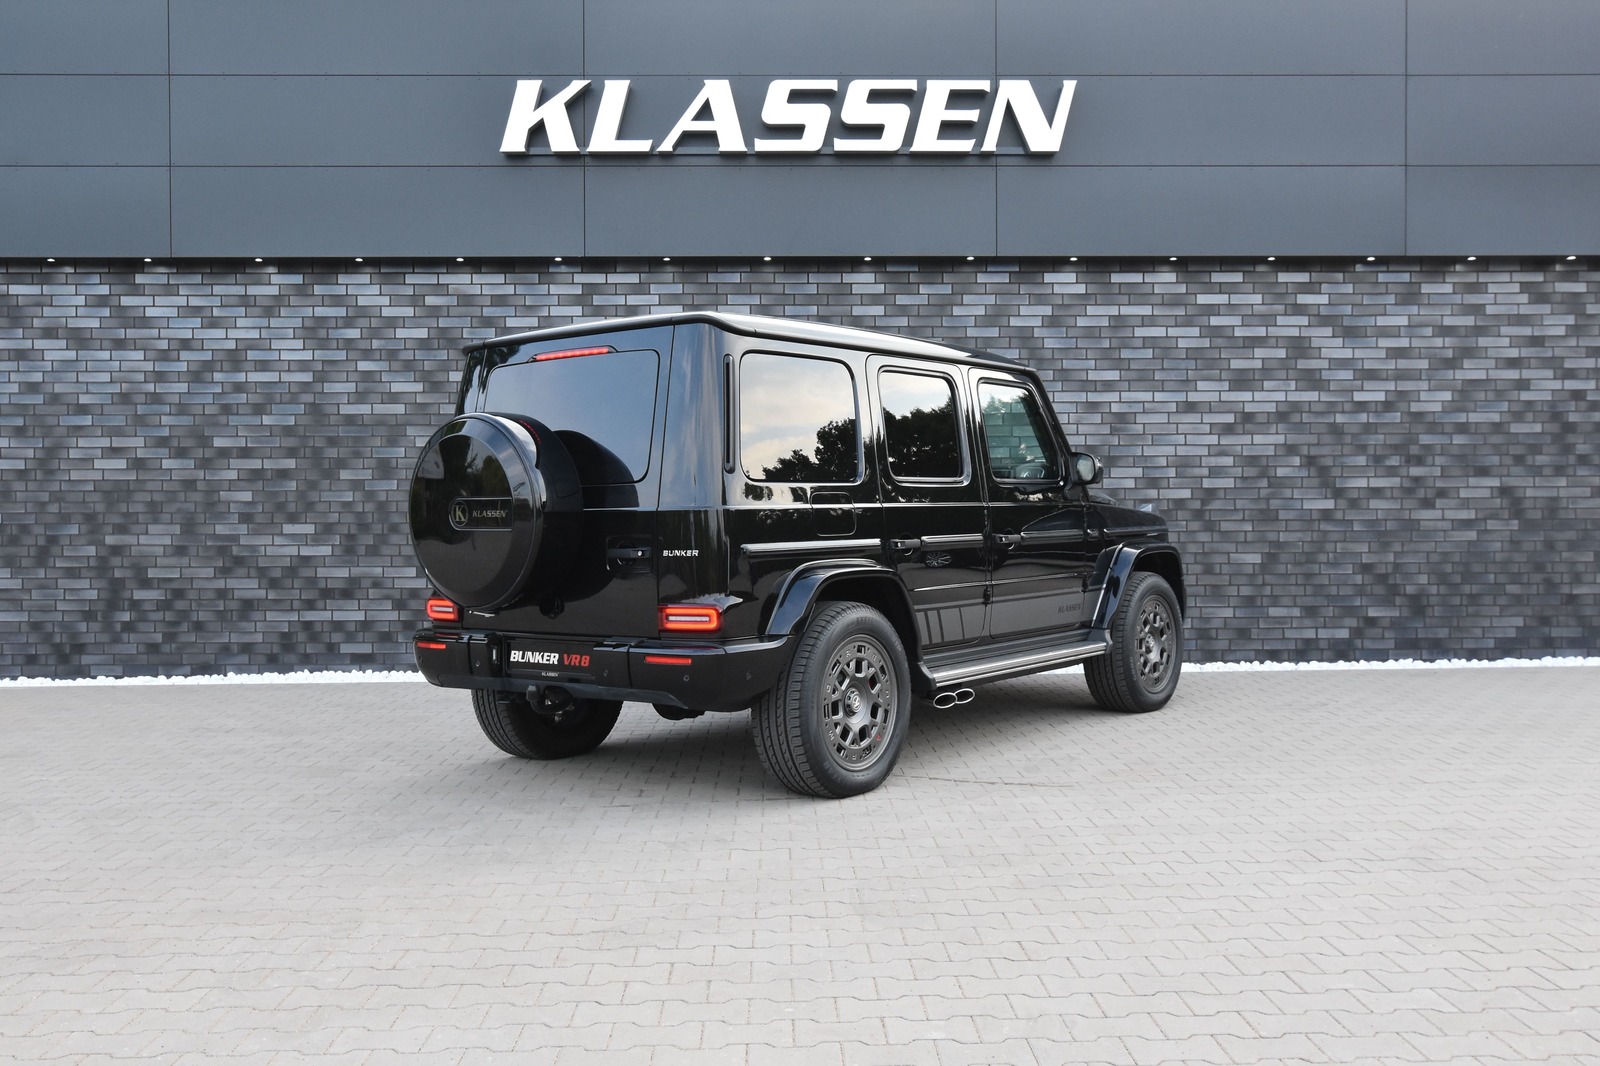 Armored Mercedes-Benz G63 AMG, Bulletproof G-Wagon or G-Class for Sale